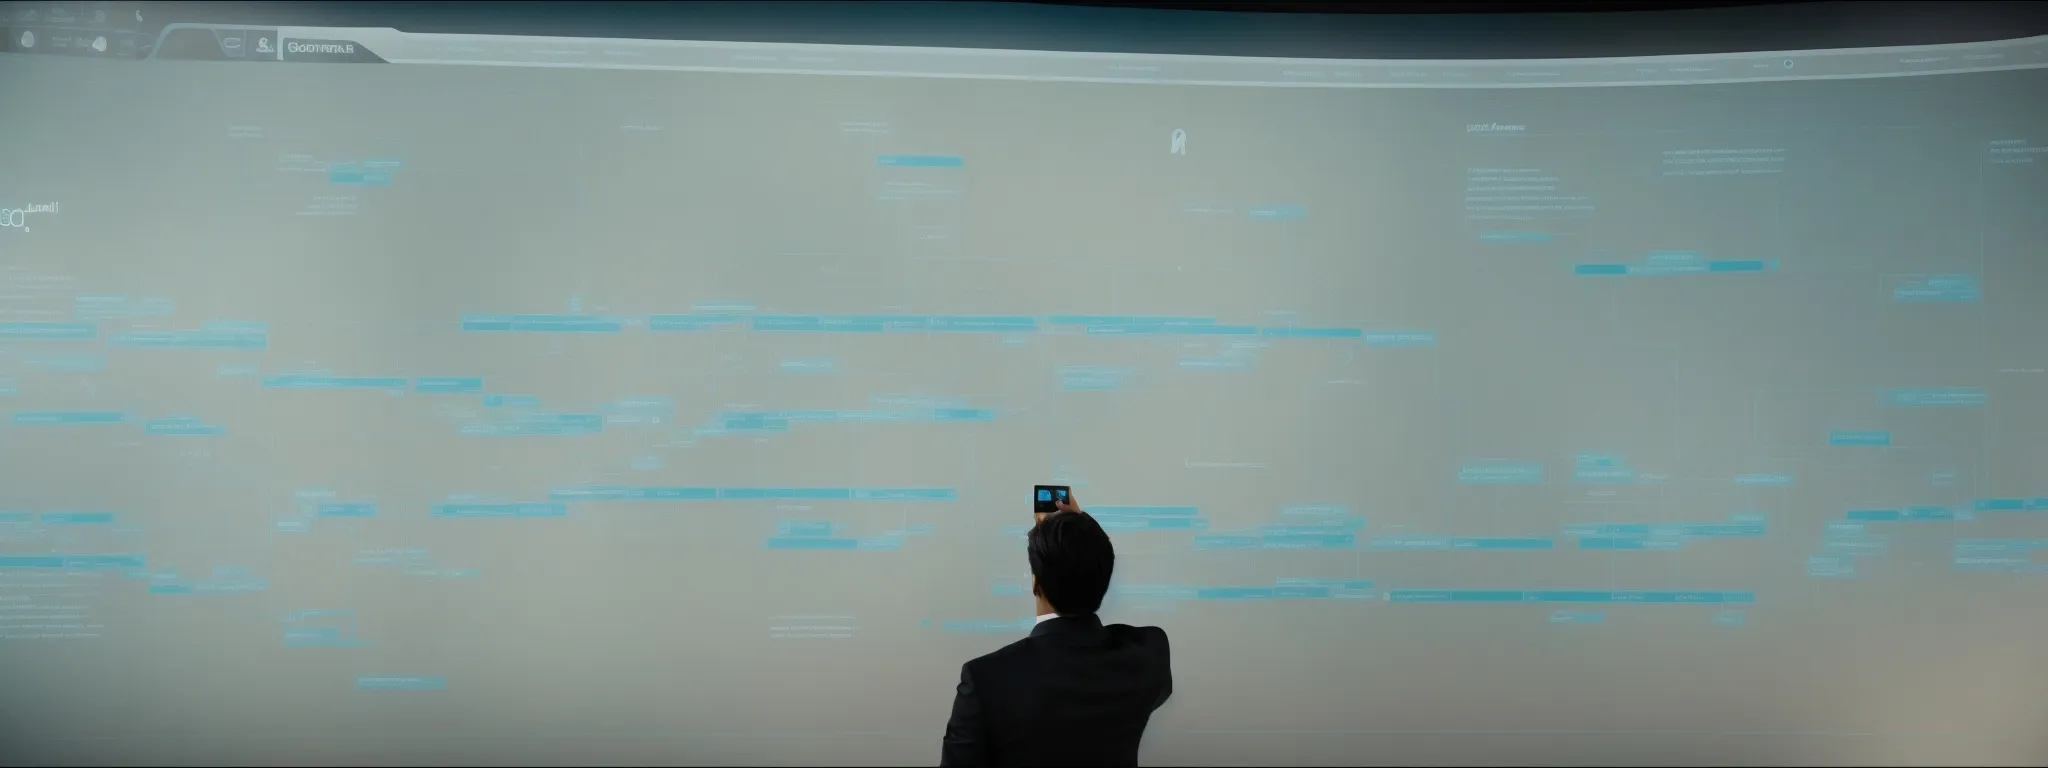 a webmaster orchestrates links on a large interactive screen displaying a website's sitemap.